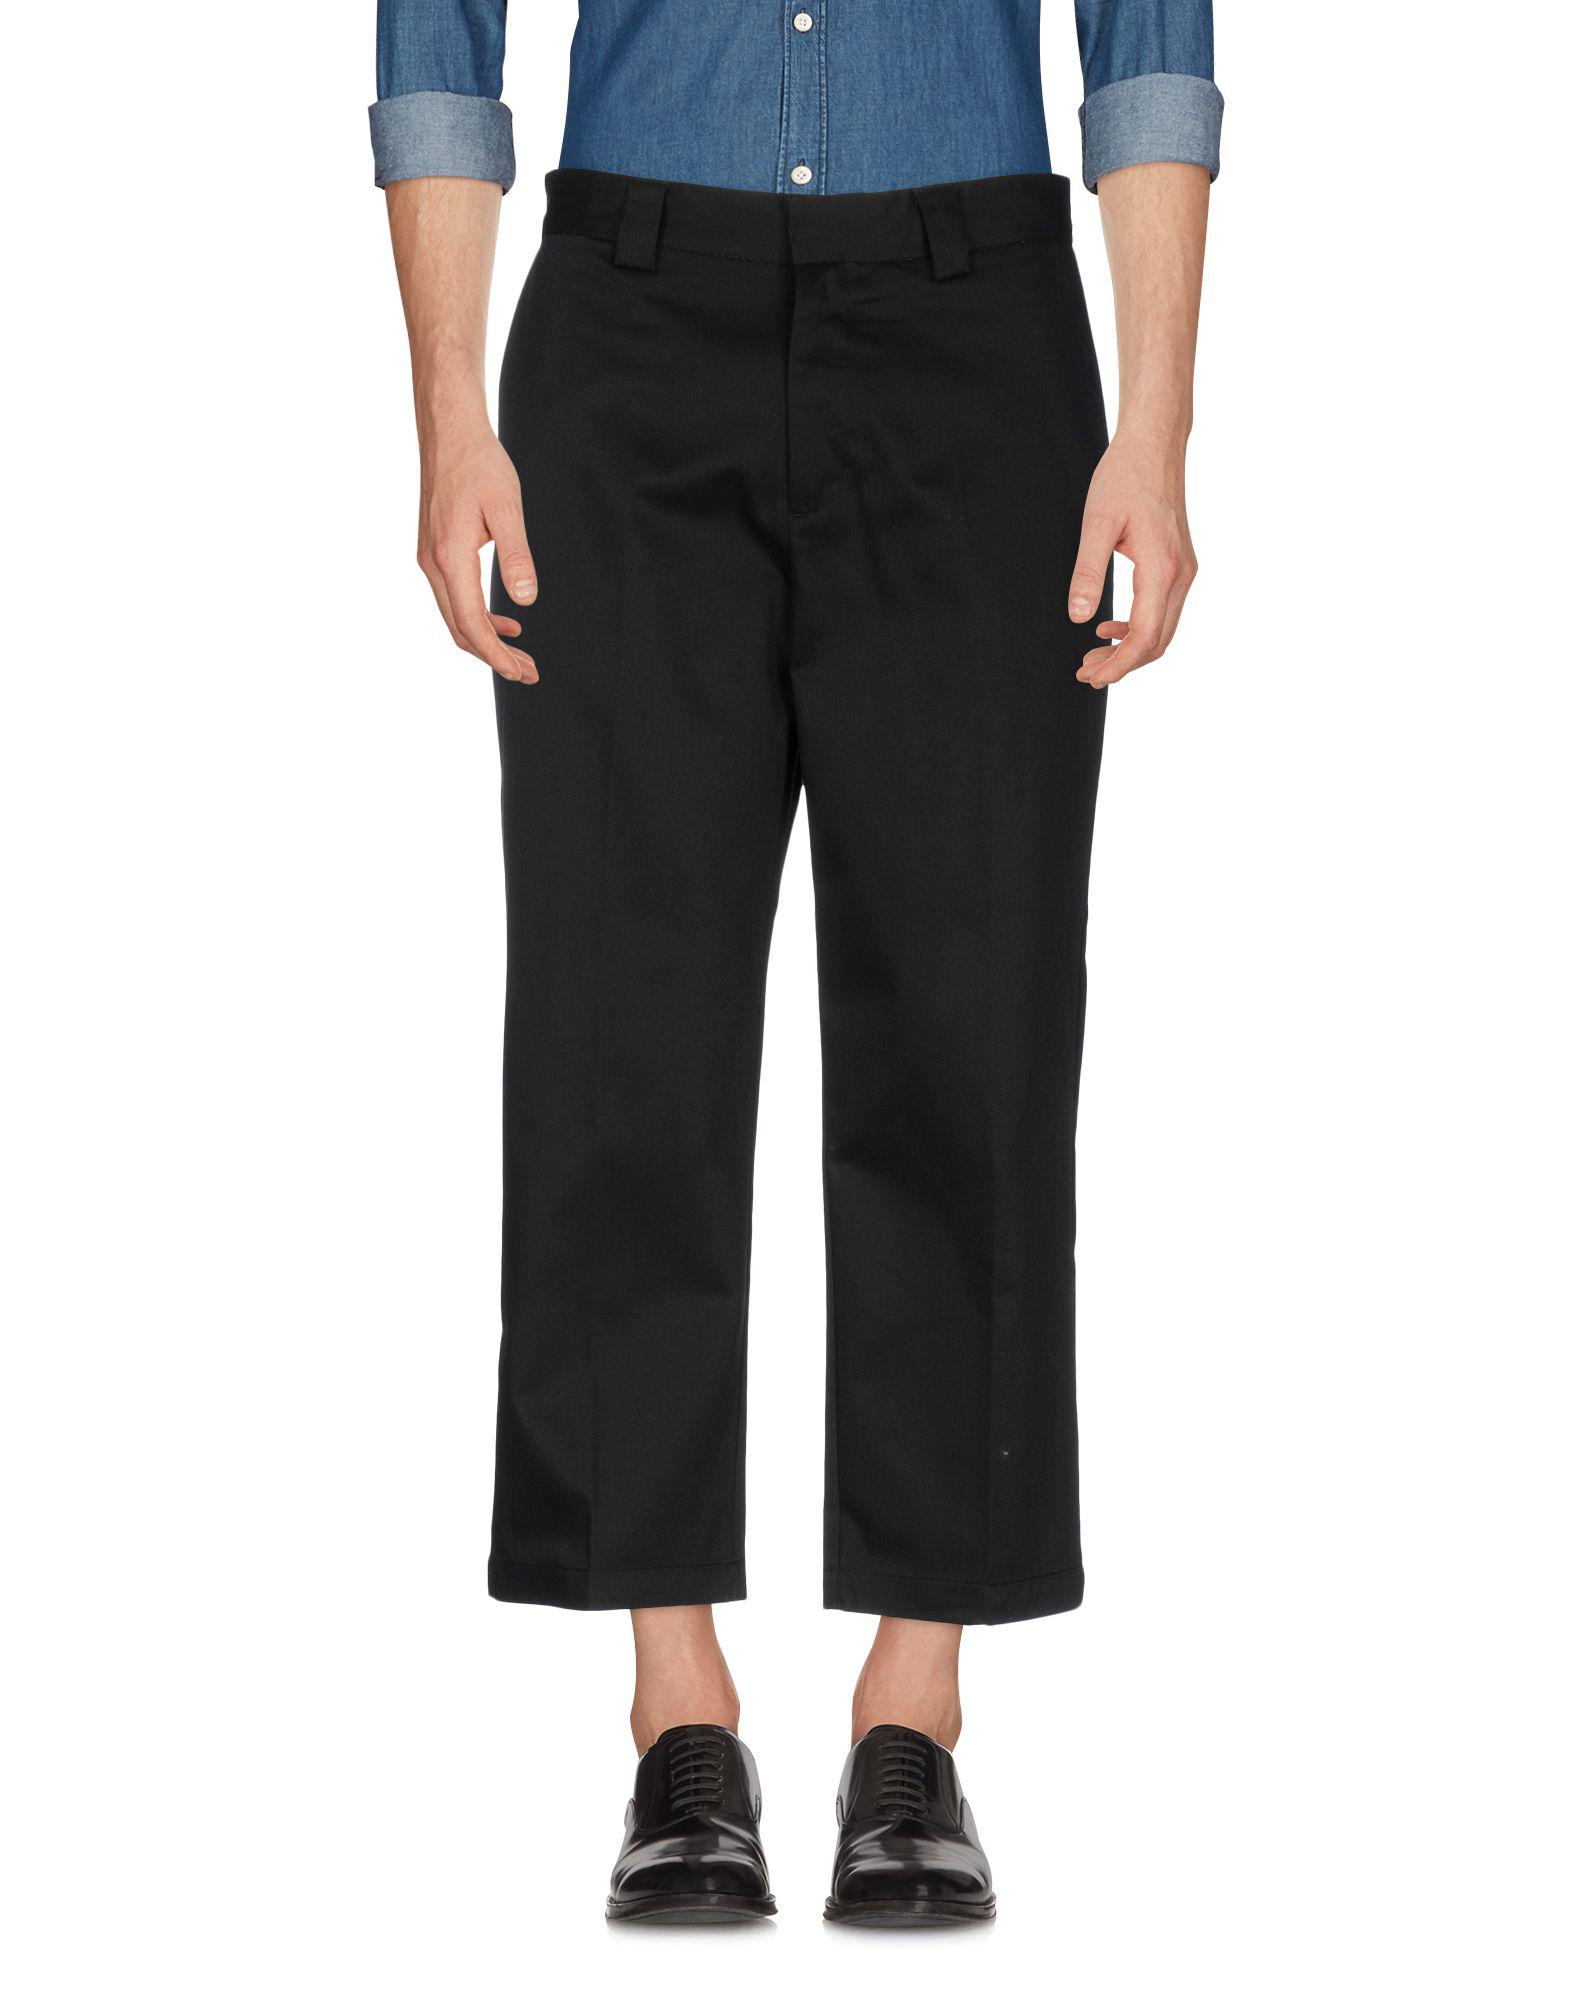 Stussy Synthetic Casual Pants in Black for Men - Lyst